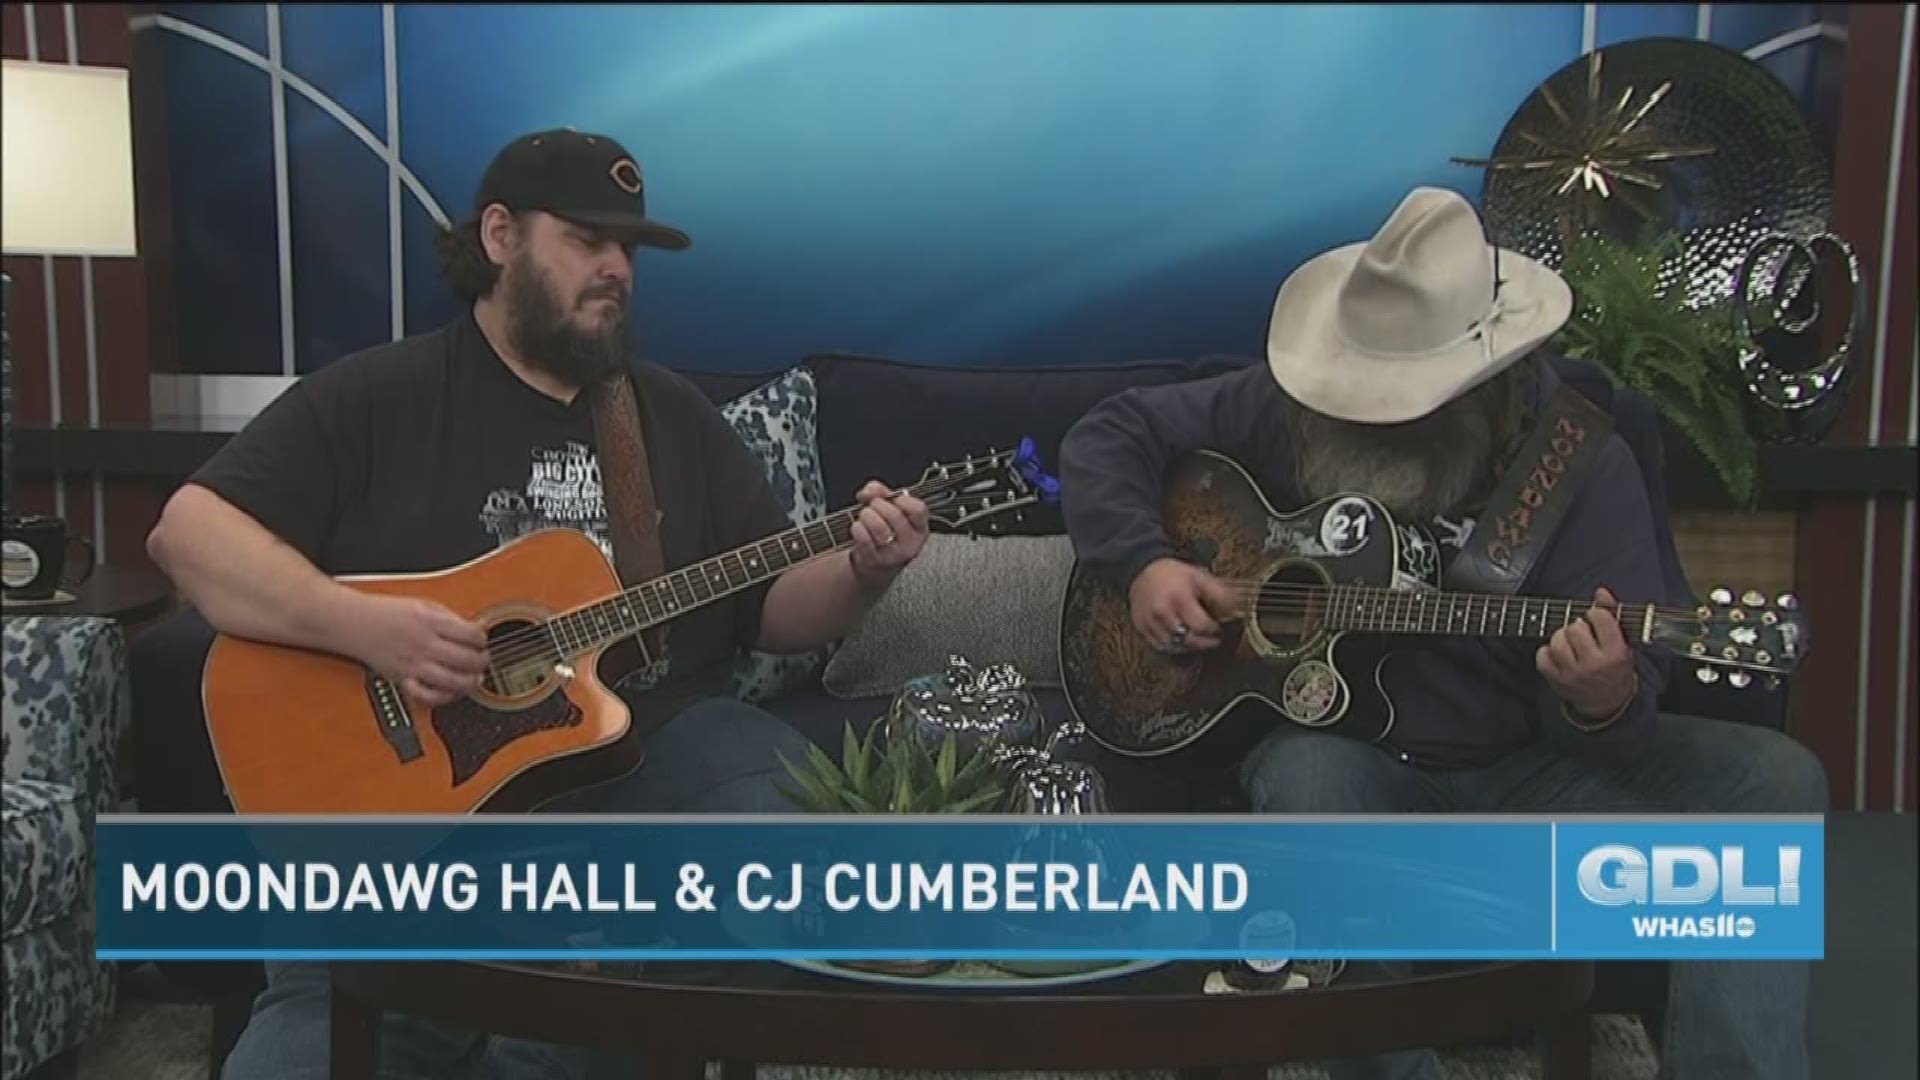 Moondawg Hall & CJ Cumberland perform Hank William's "Old Habits" on Great Day Live!